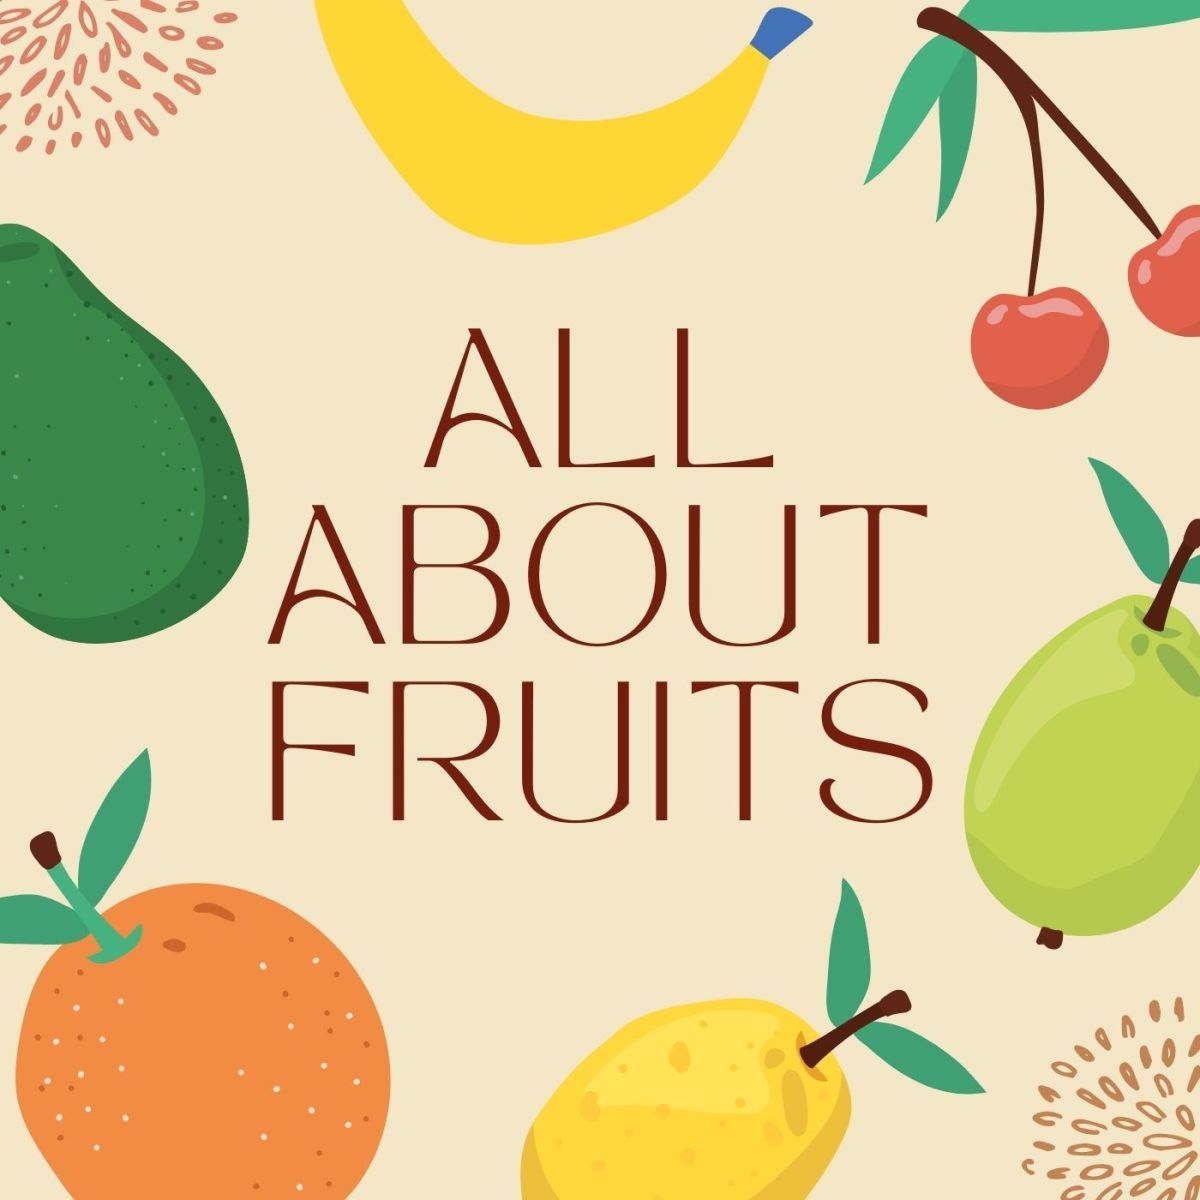 Fruits 101: Definition, Characteristics, and Types